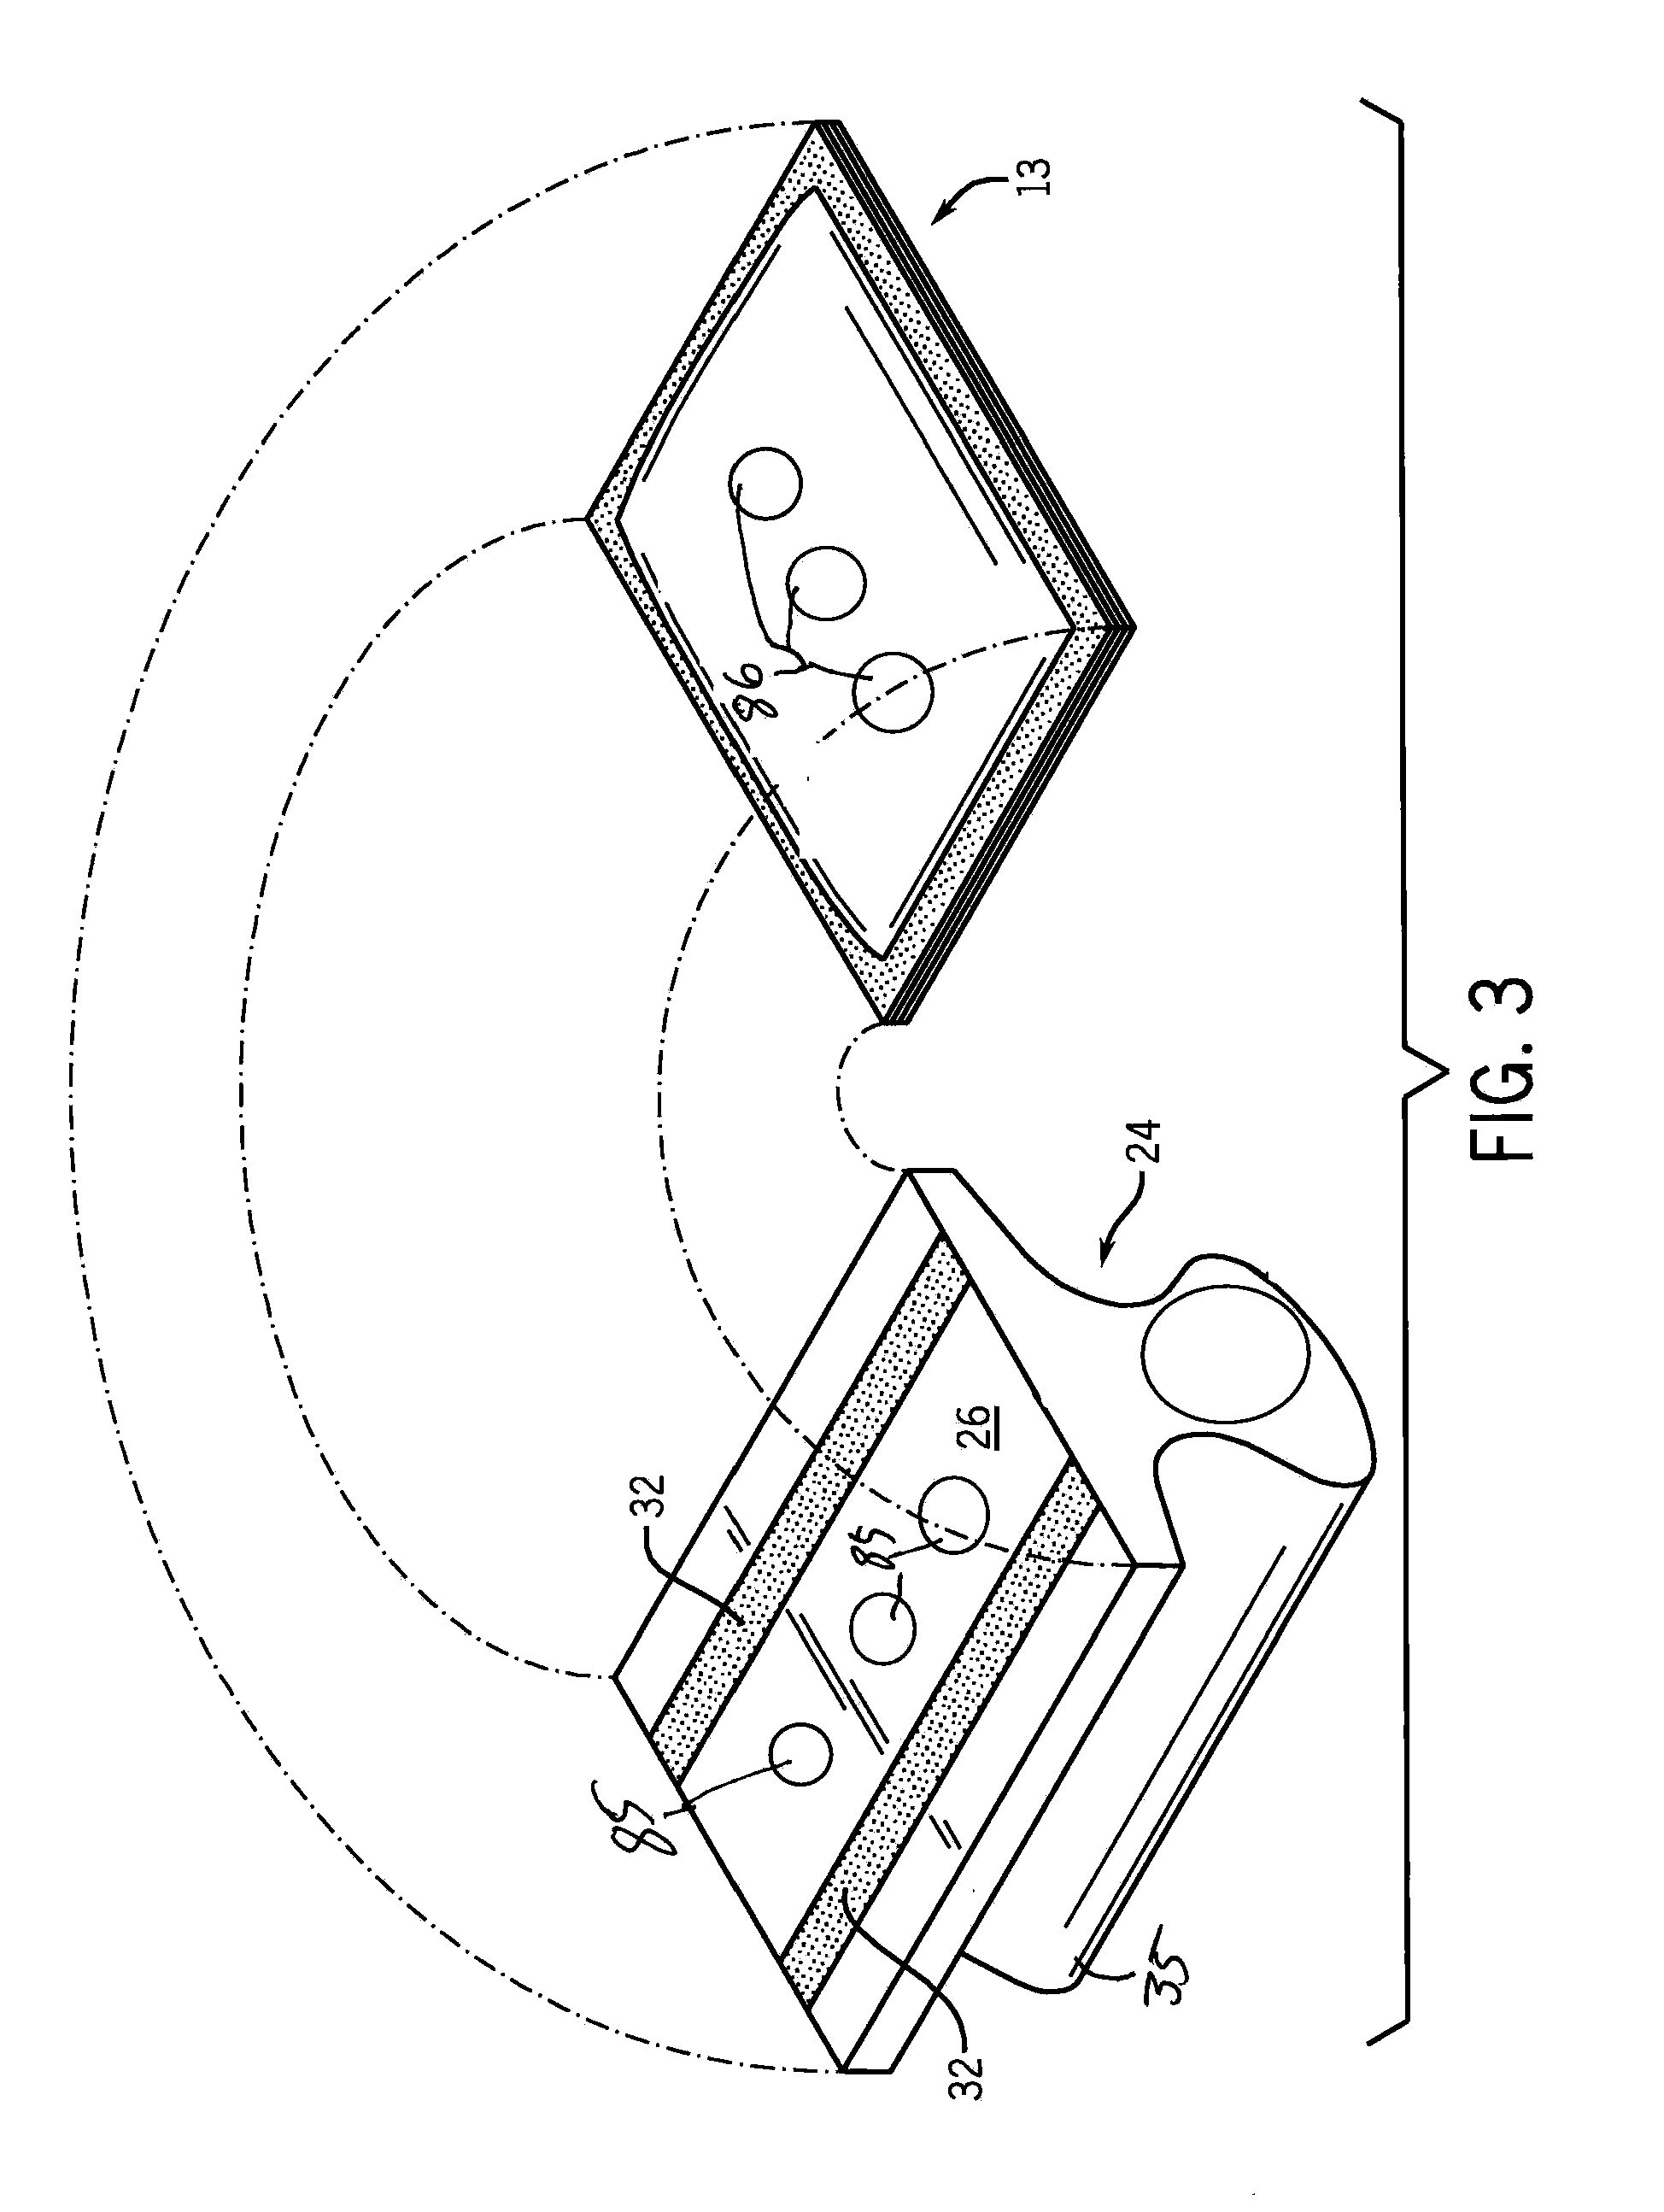 Portable Steam Generating Device